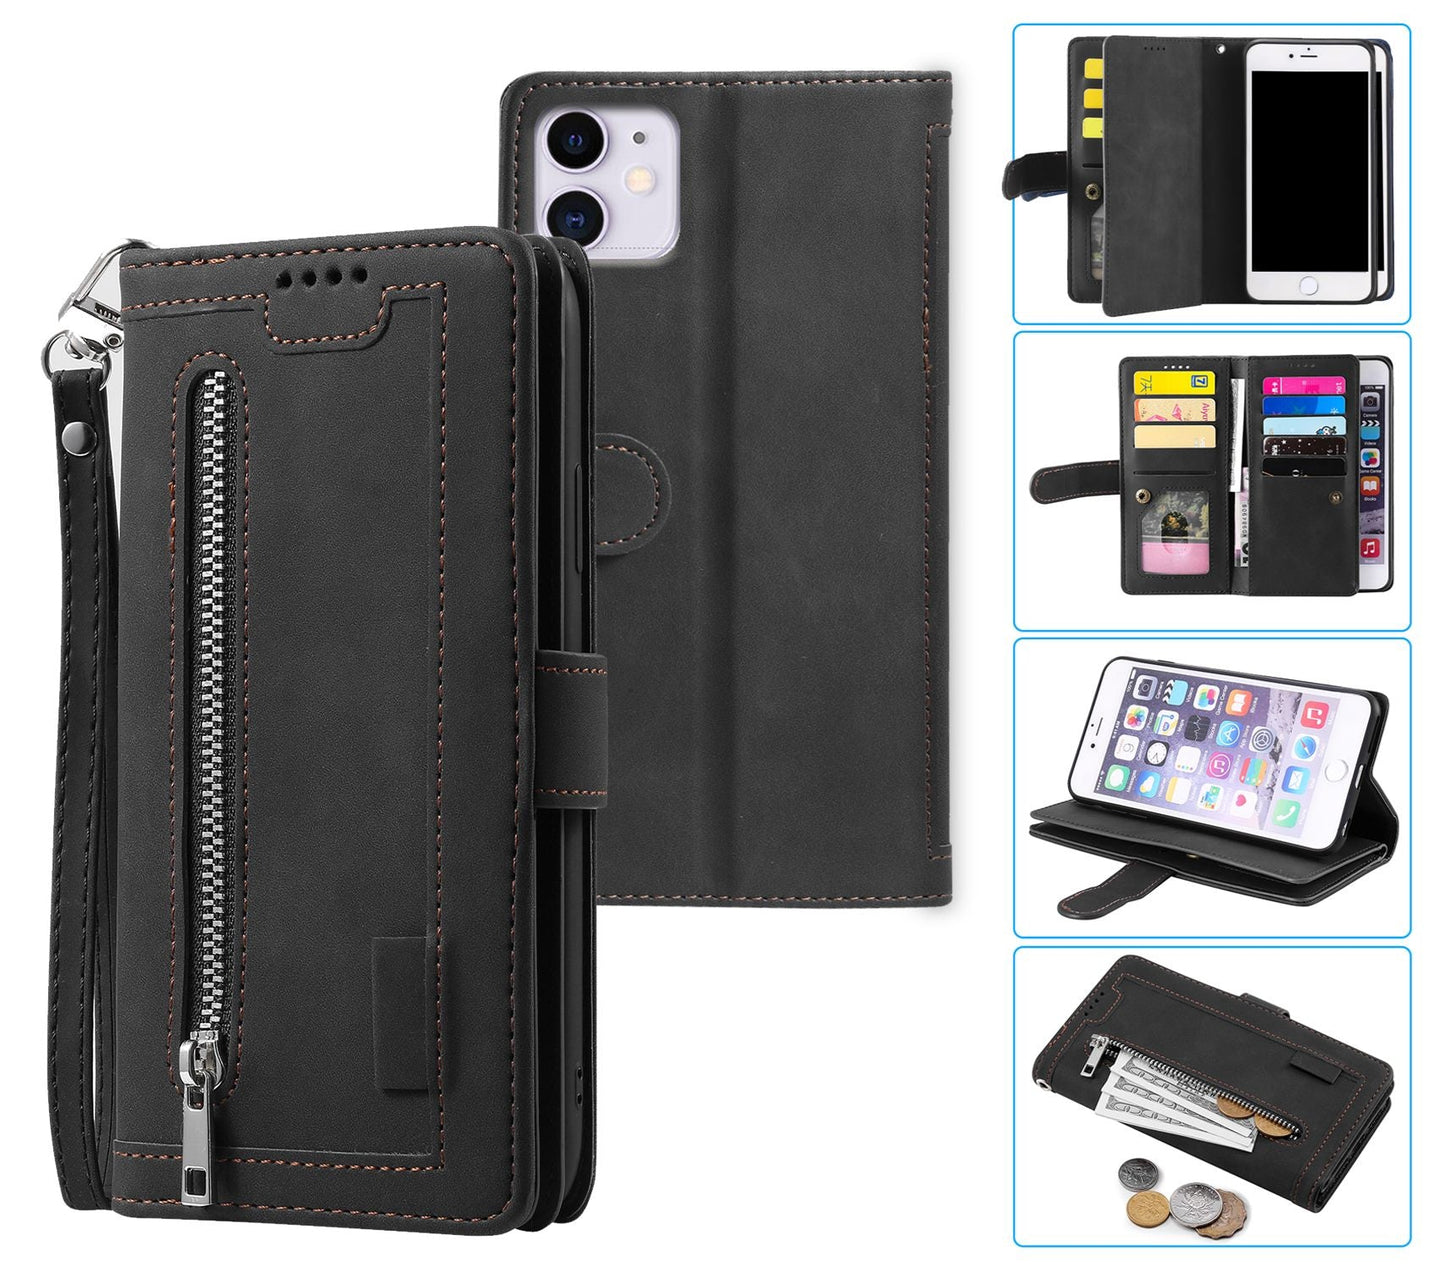 iPhone 11 Case Wallet Cover Black